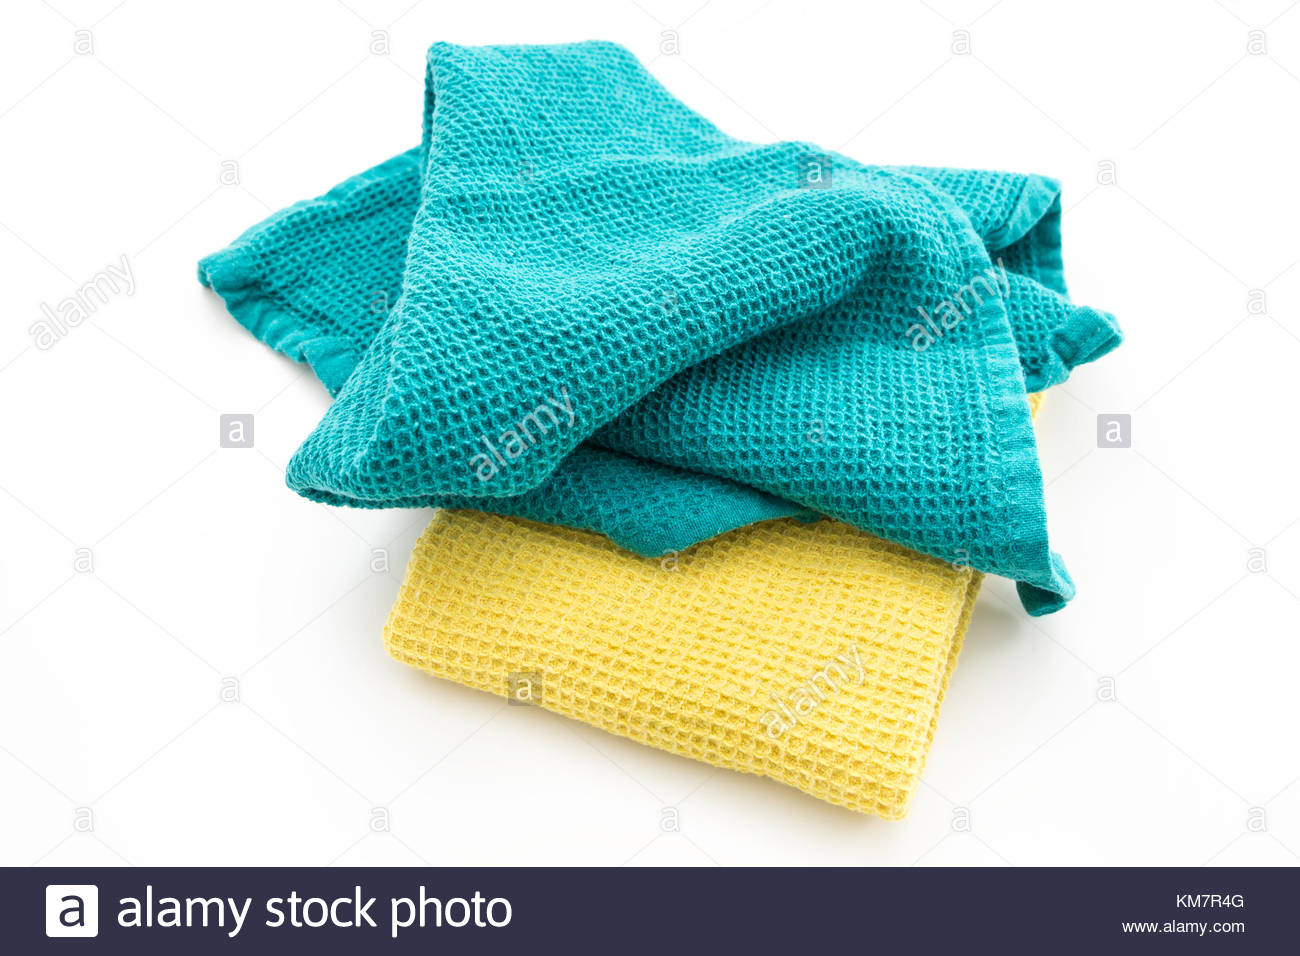 Messy And Folded Colorful Kitchen Towels On White Background